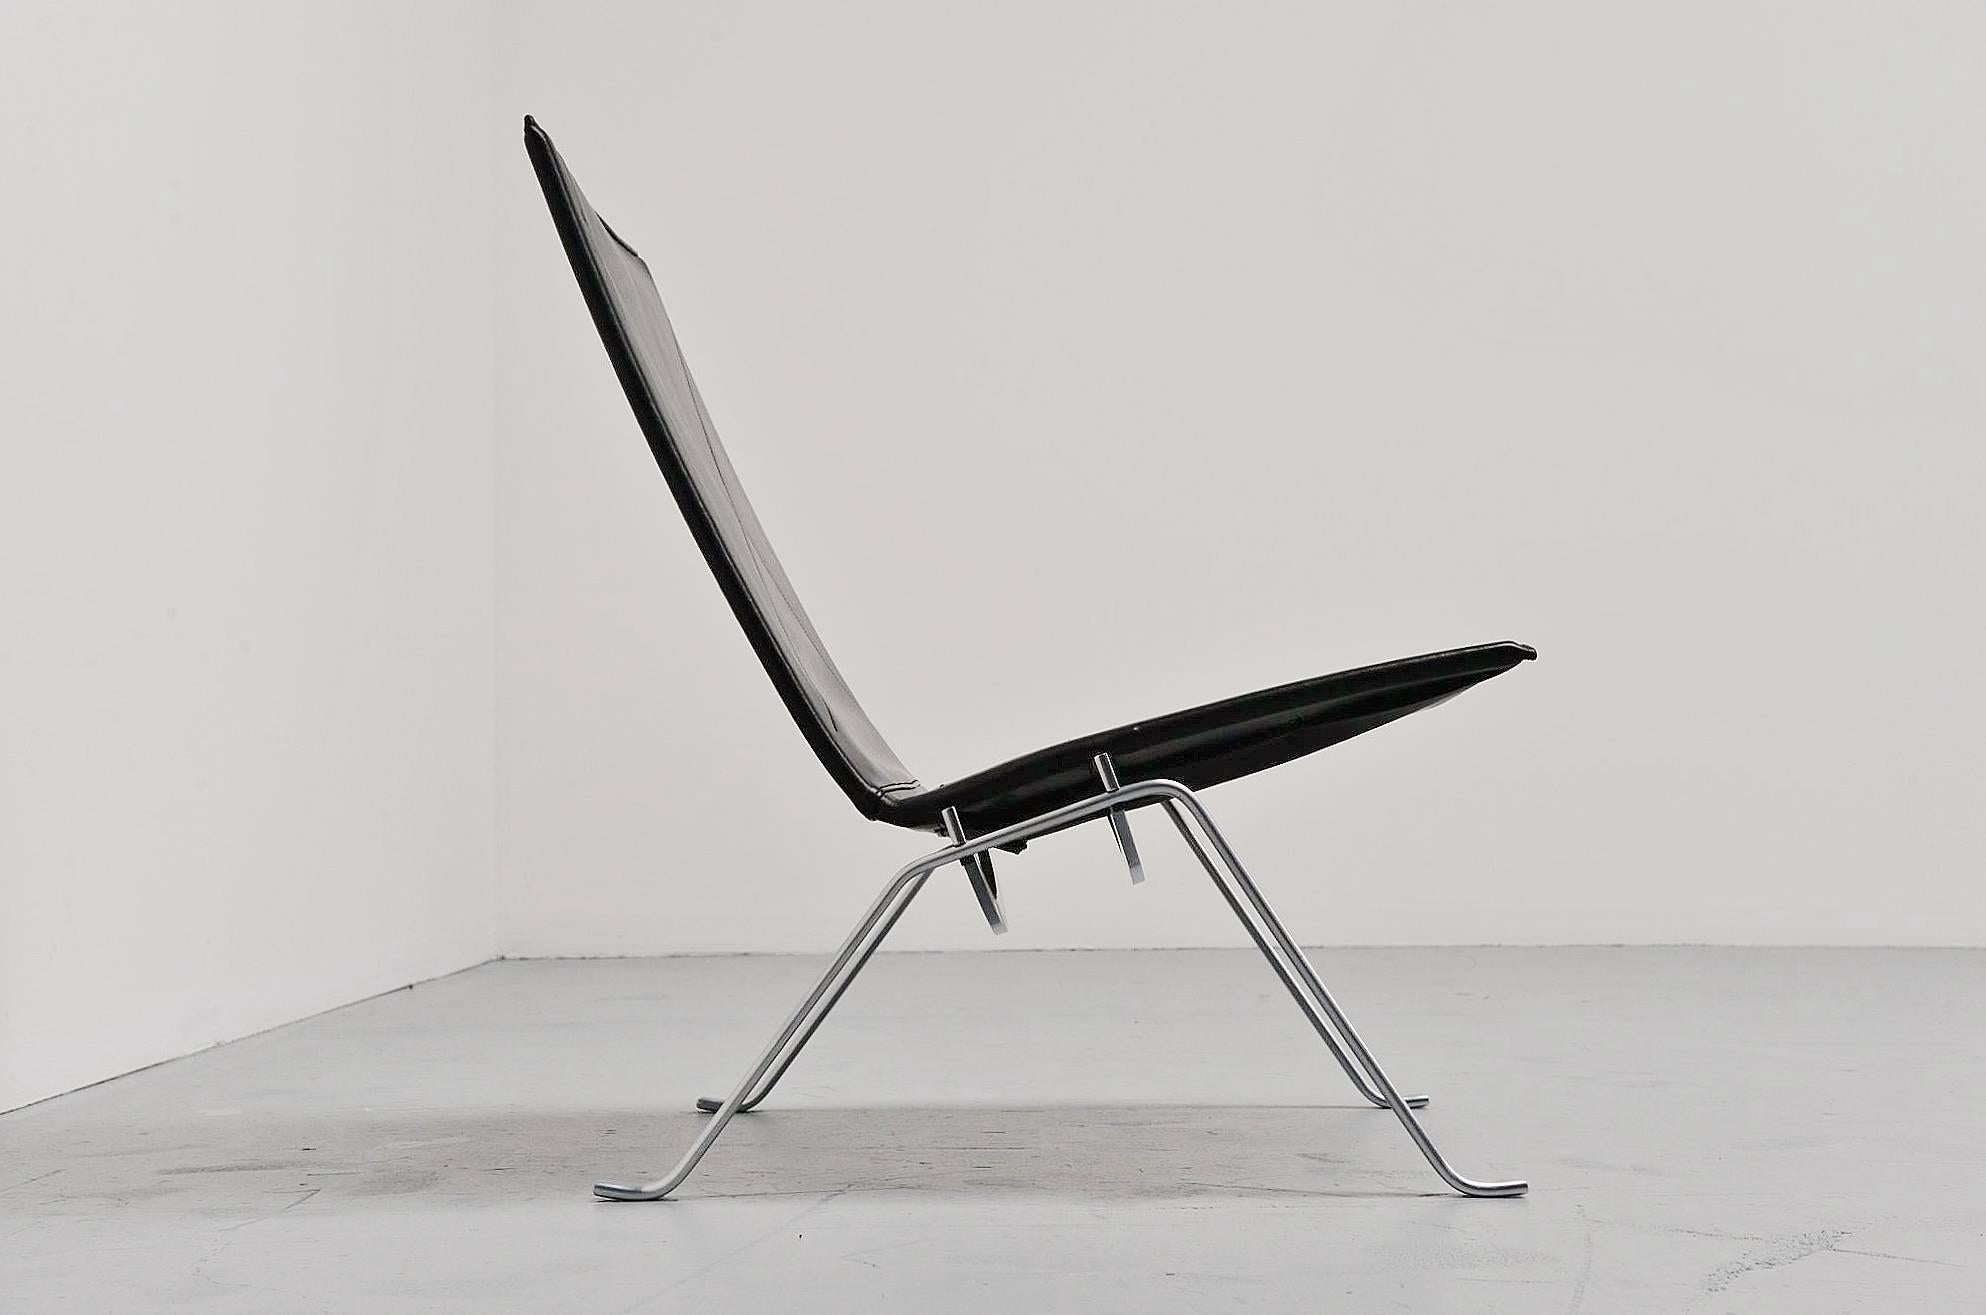 This is for the famous PK22 chair designed by Poul Kjaerholm for E Kold Christensen, Denmark, 1956. This model is an early edition with very nice black leather. The chair consisted of a spring steel structure, one pair each of legs, crossbars and